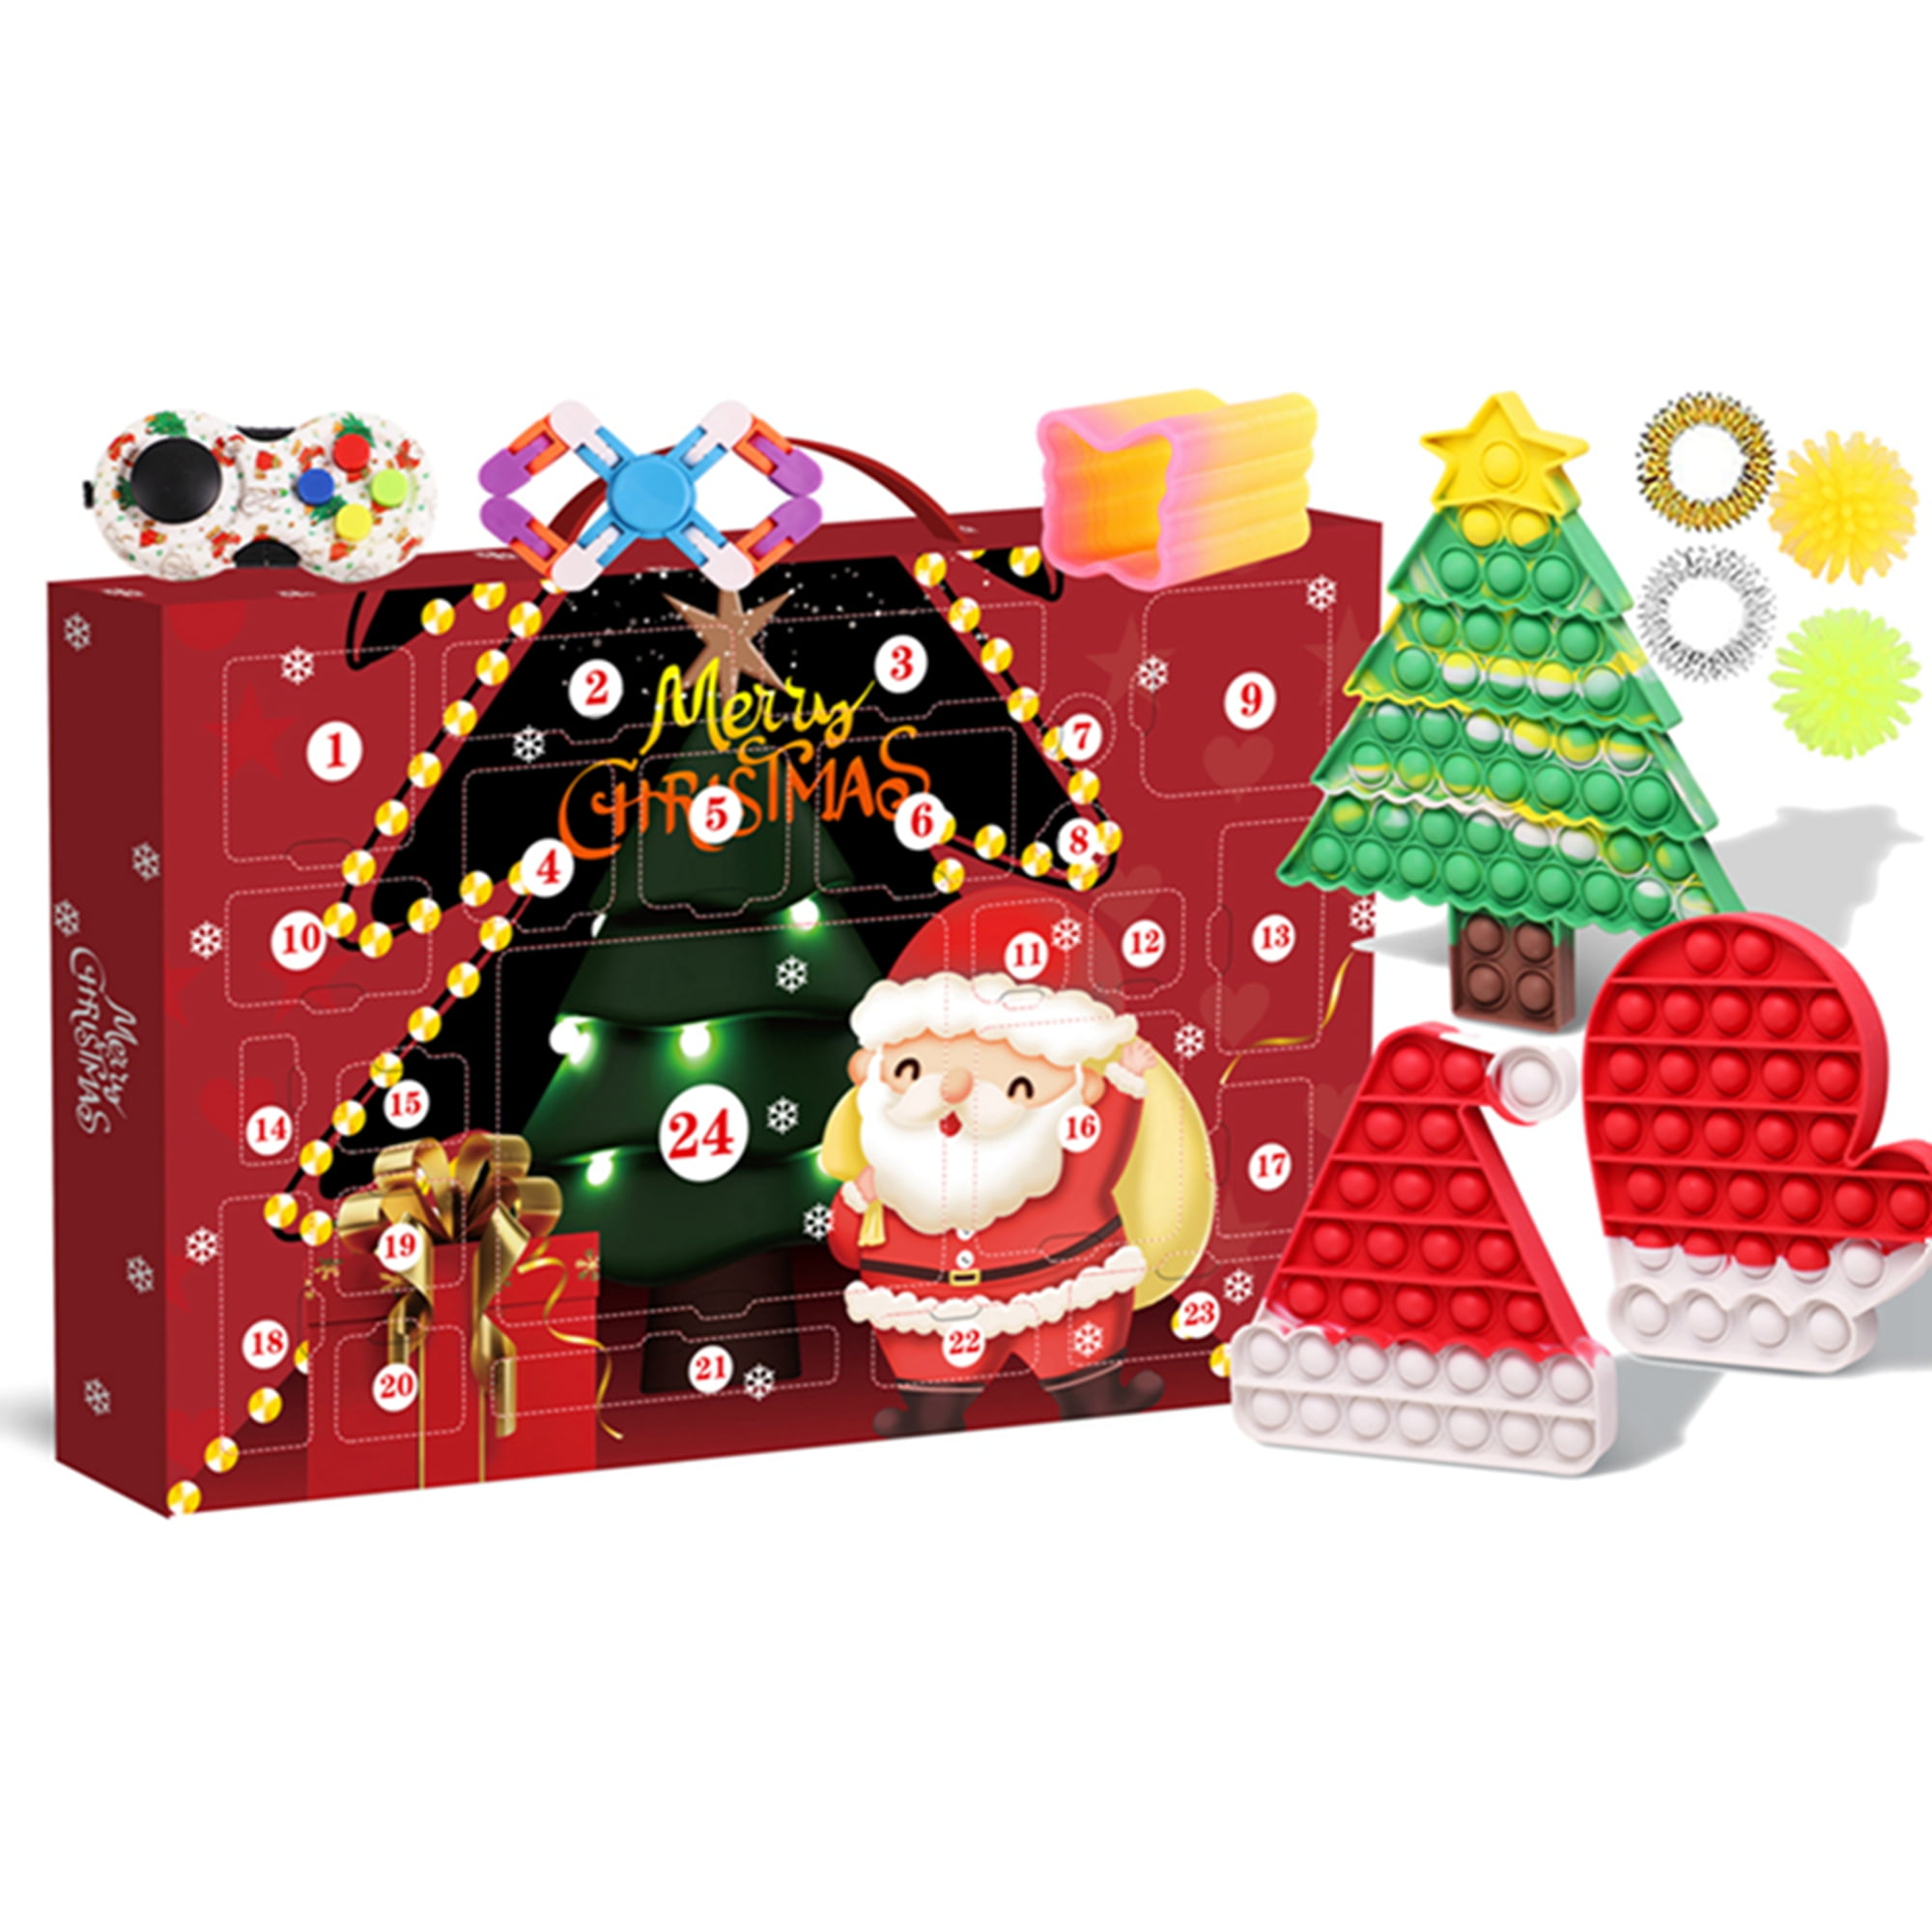 Pop-py Playtime Advent Calendar for Kids Xmas Gift Toy Set 24 Day Count  Down To Christmas Gift Set Xmas Gift for Kids Friends - AliExpress